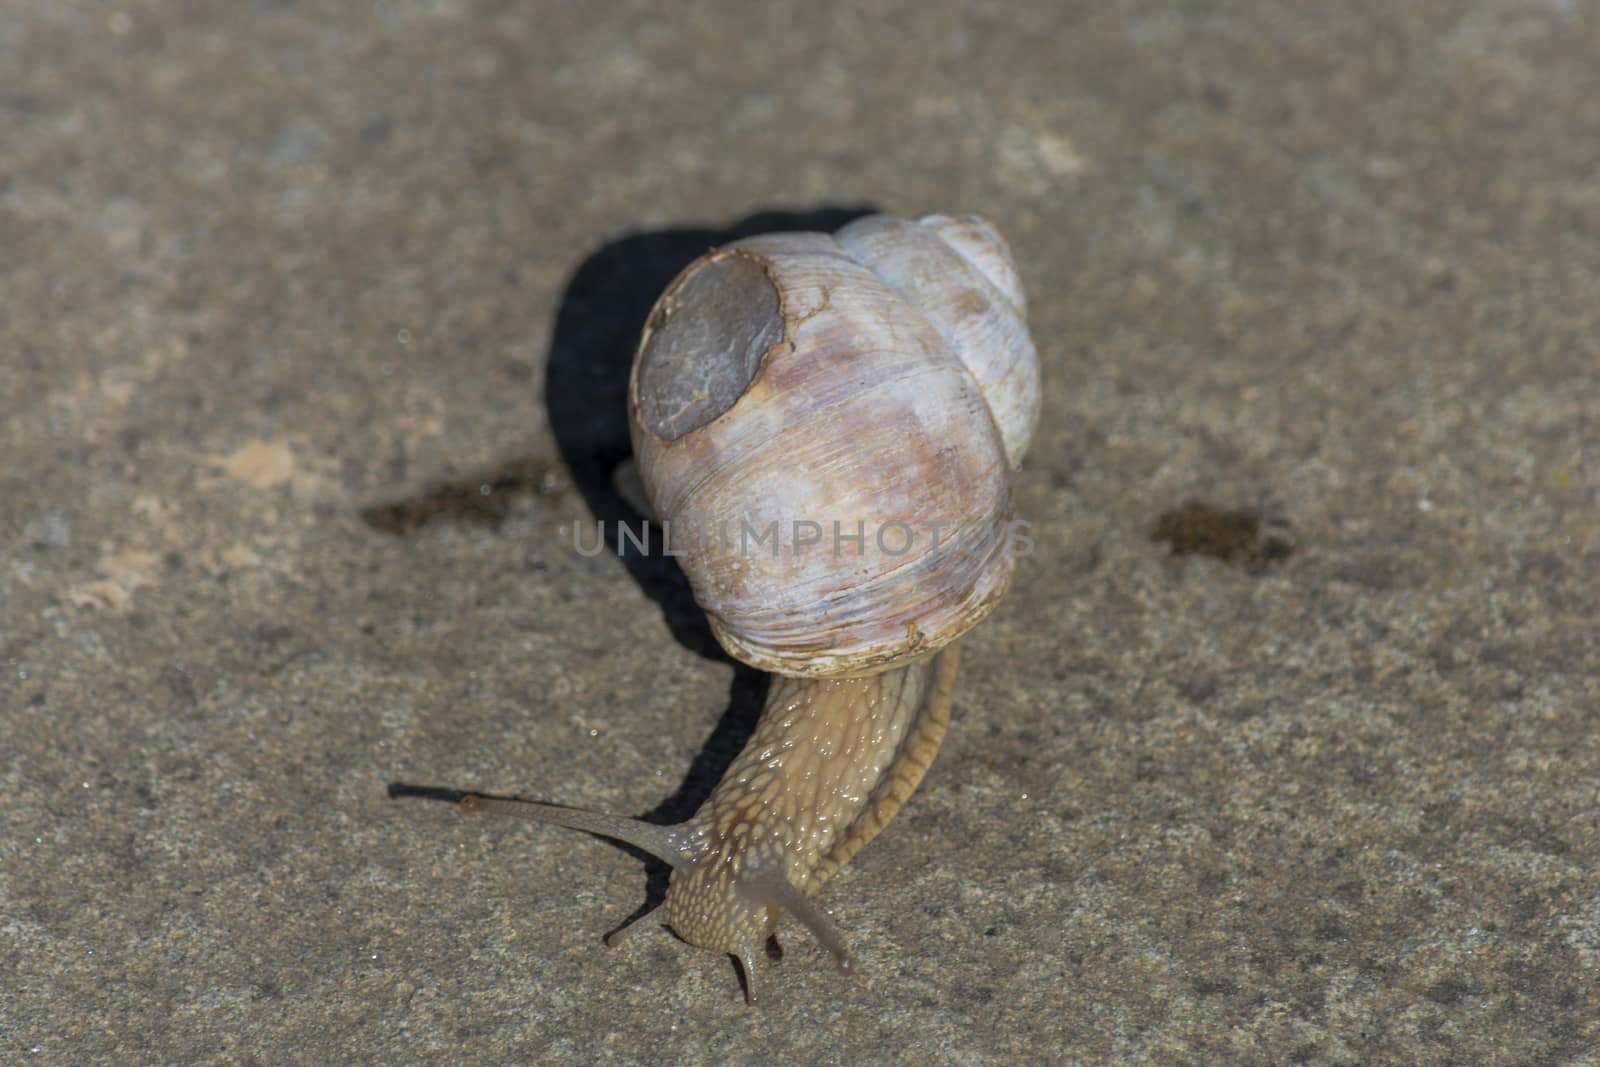 Snail with injured housing           by JFsPic